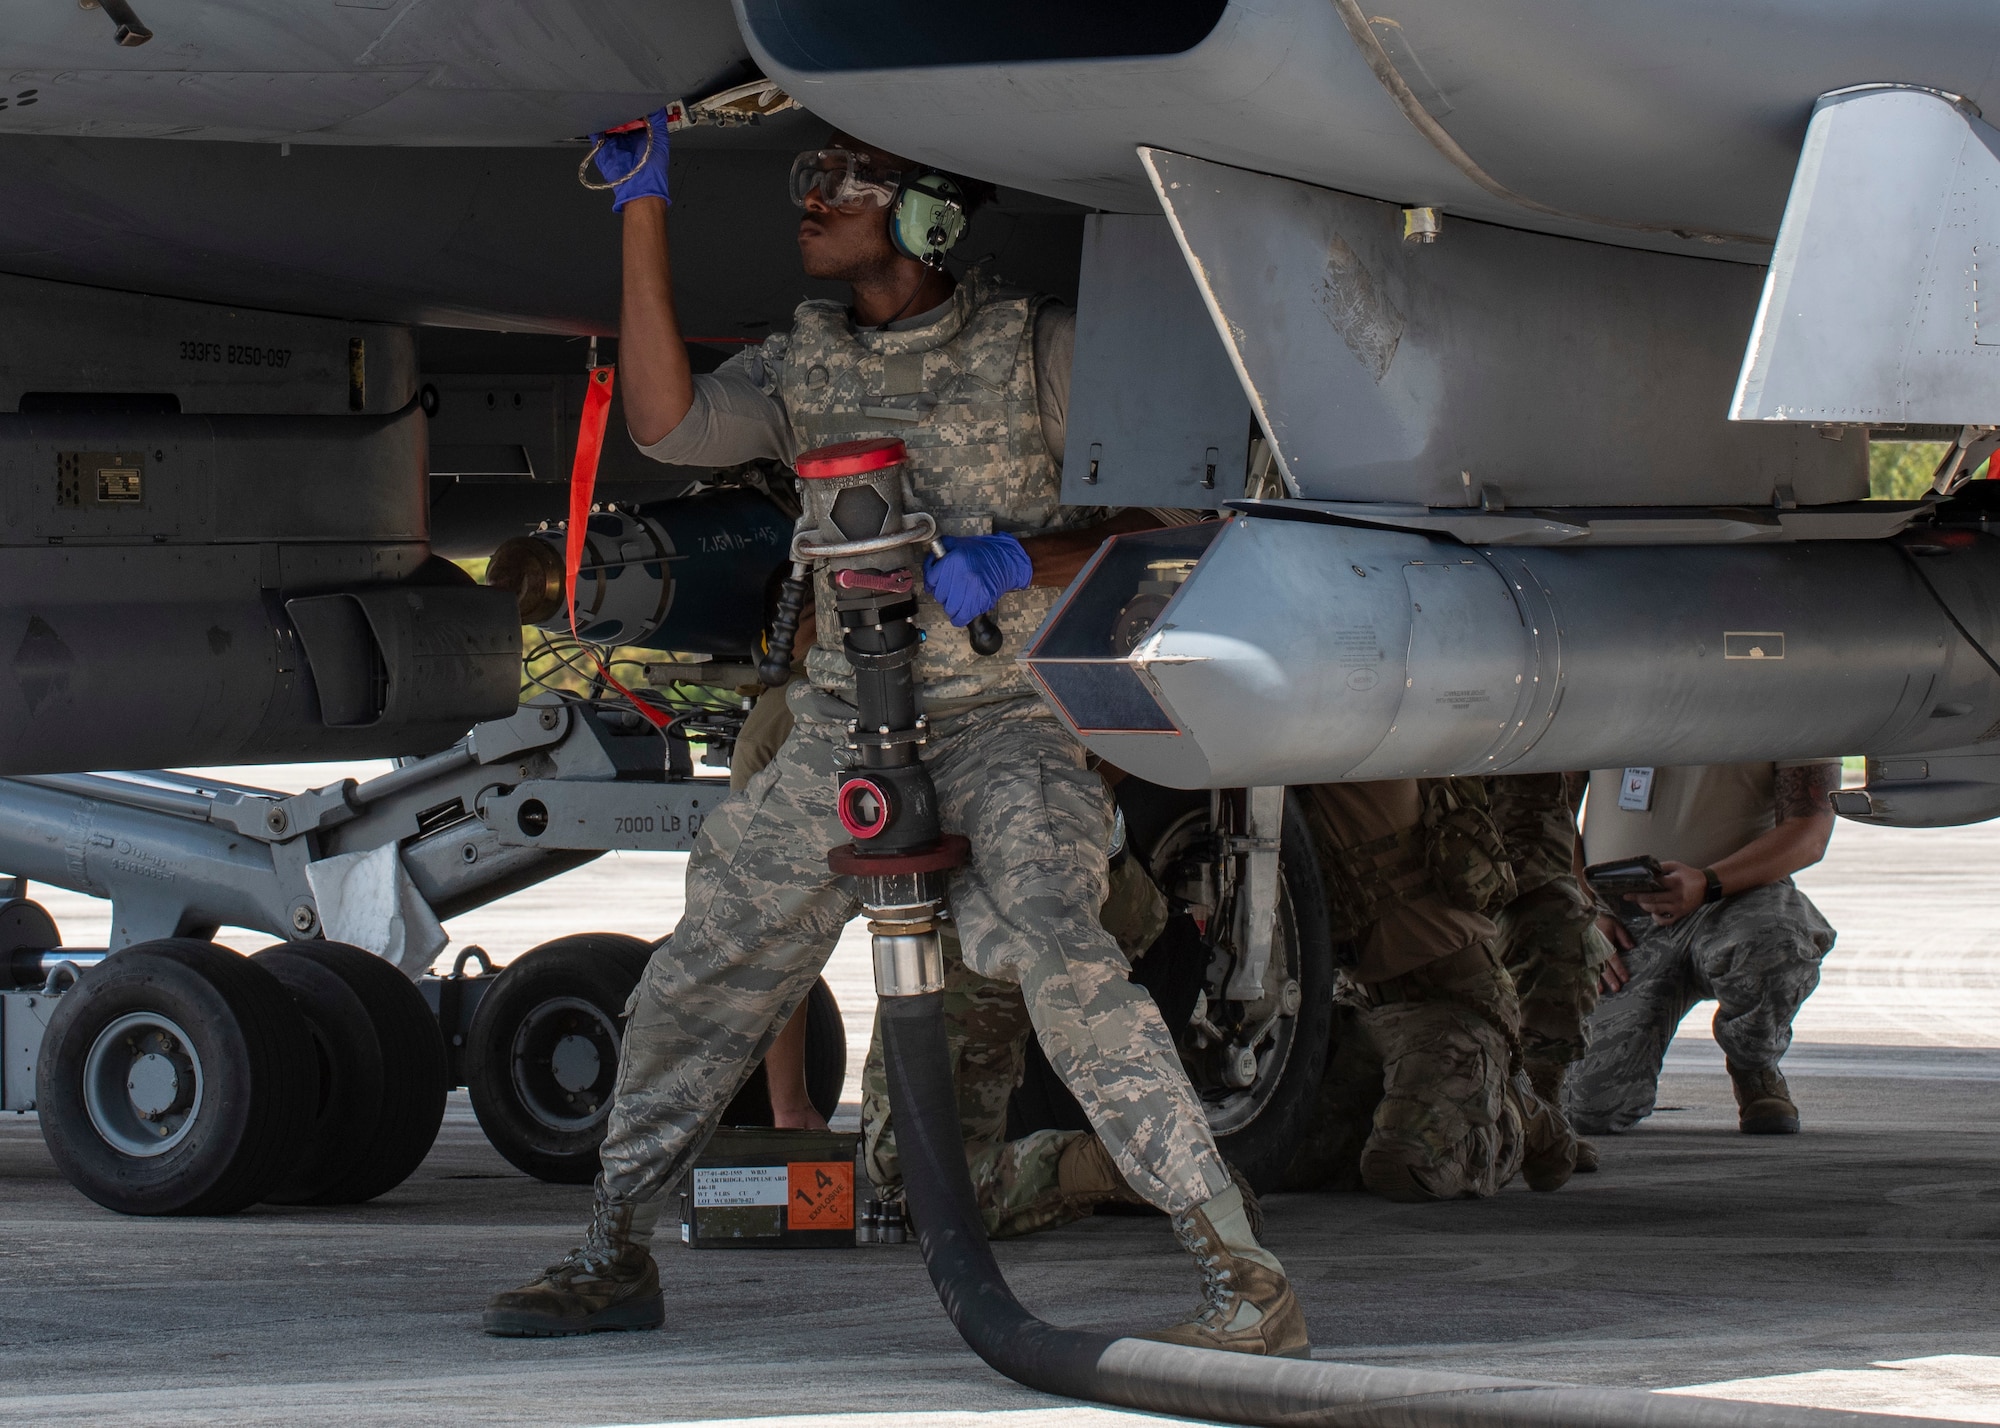 An Airman assigned to Seymour Johnson Air Force Base hot-pit refuels an F-15E Strike Eagle during Razor Talon at Cherry Point Marine Corp Air Station, North Carolina, Aug.12, 2020.